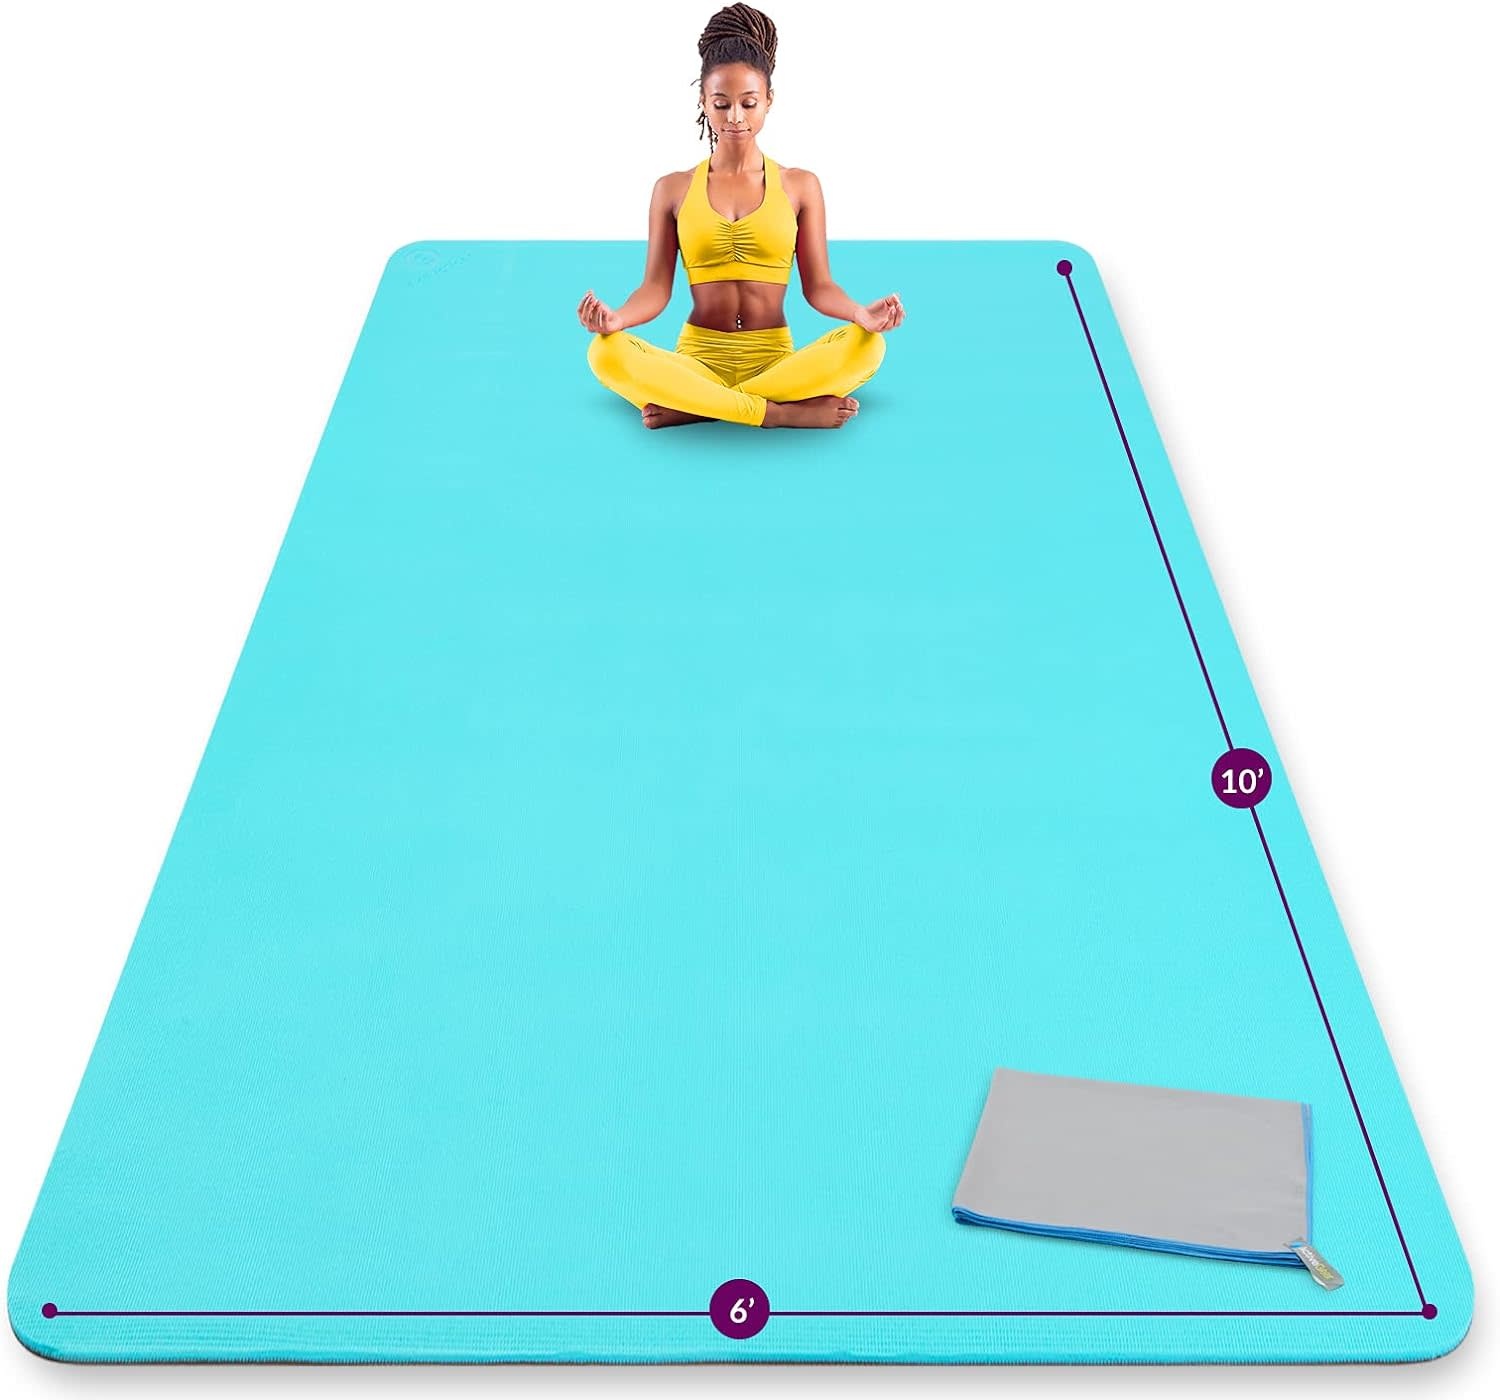 ActiveGear Large Yoga Mat 6 x 6 ft - 8mm Extra Thick, Durable, Comfortable,  Non-Slip & Odorless Premium Square Yoga and Pilates Mat for Home Gym